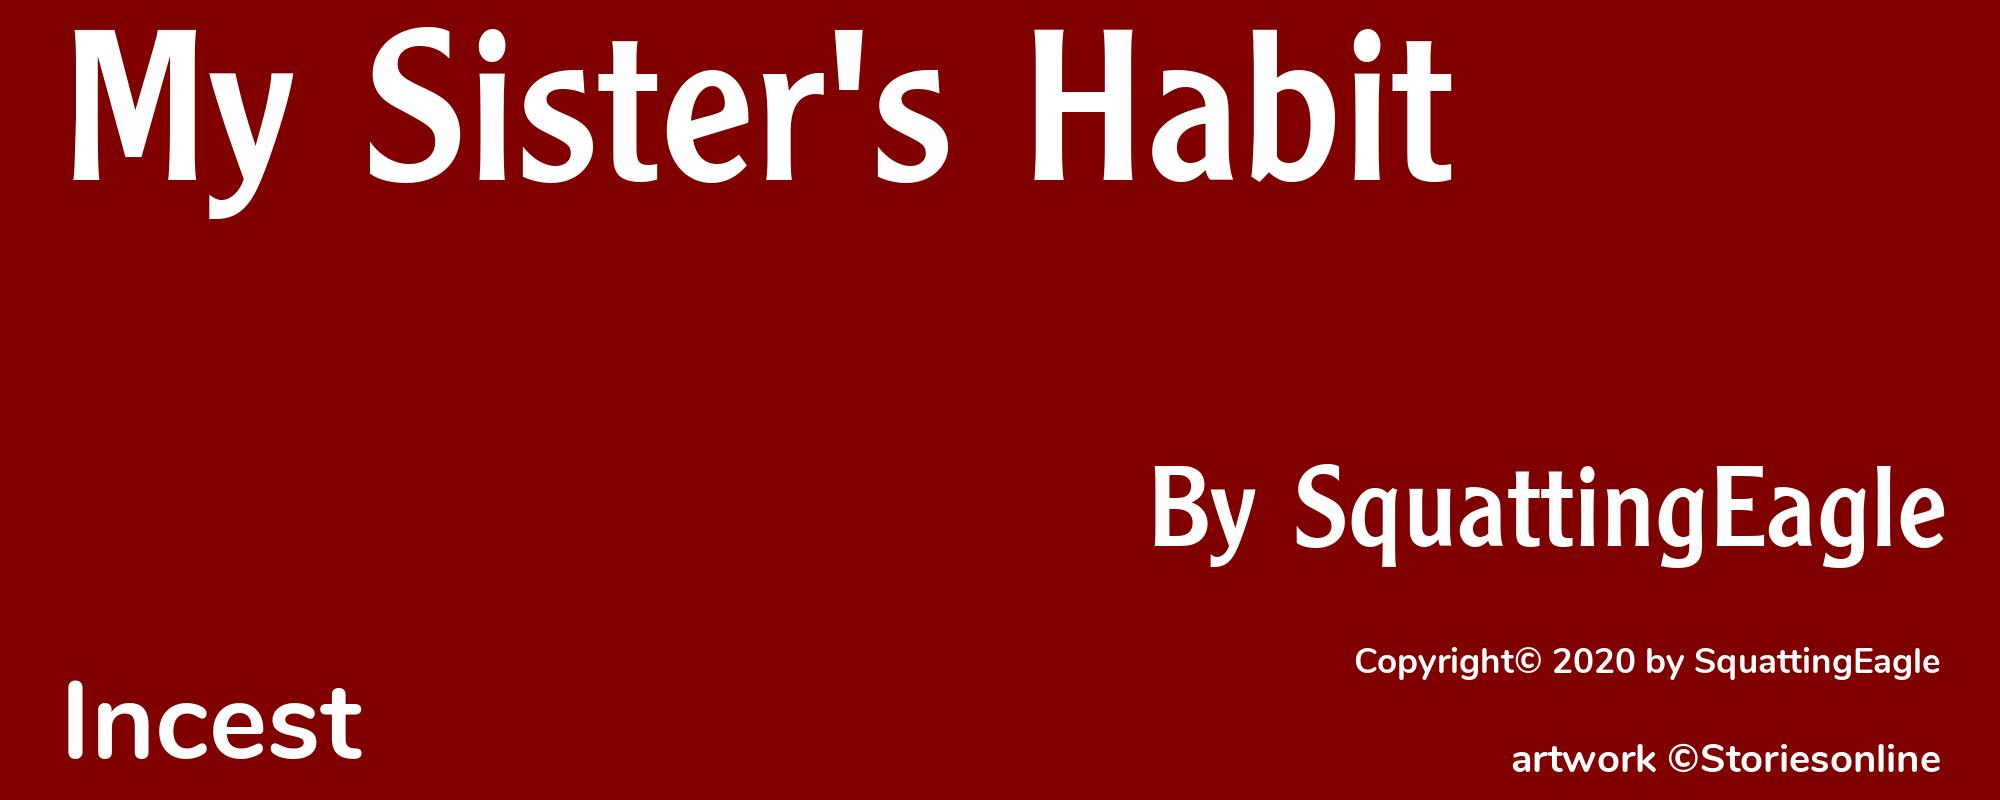 My Sister's Habit - Cover